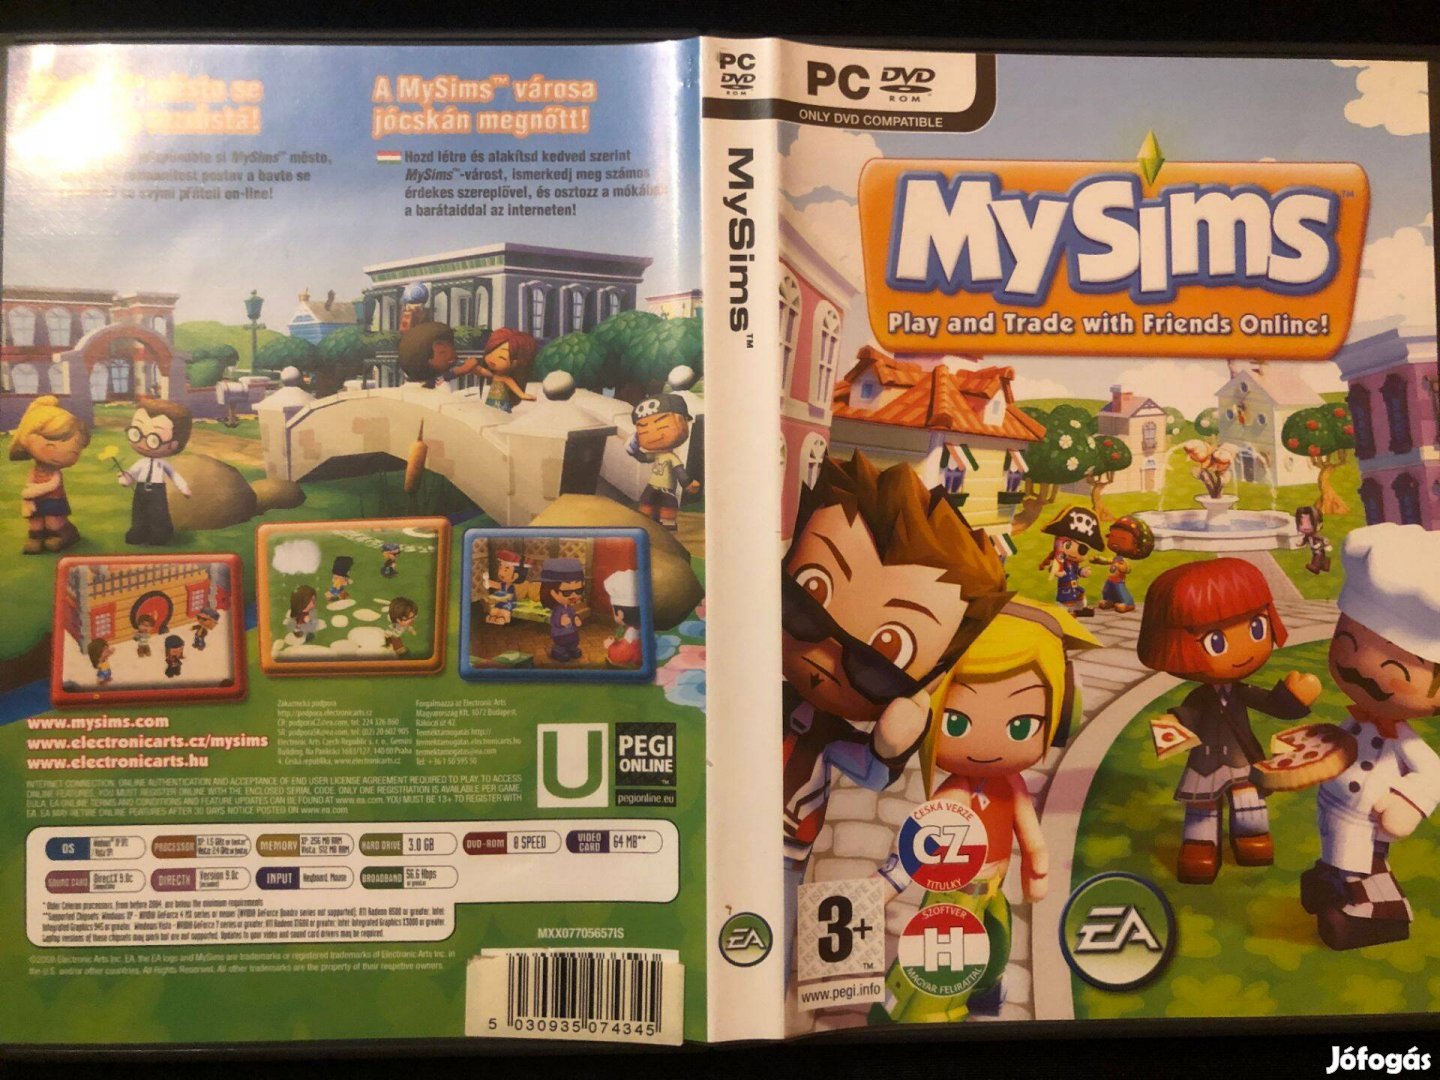 My Sims Play and Trade with Friends Online! PC játék